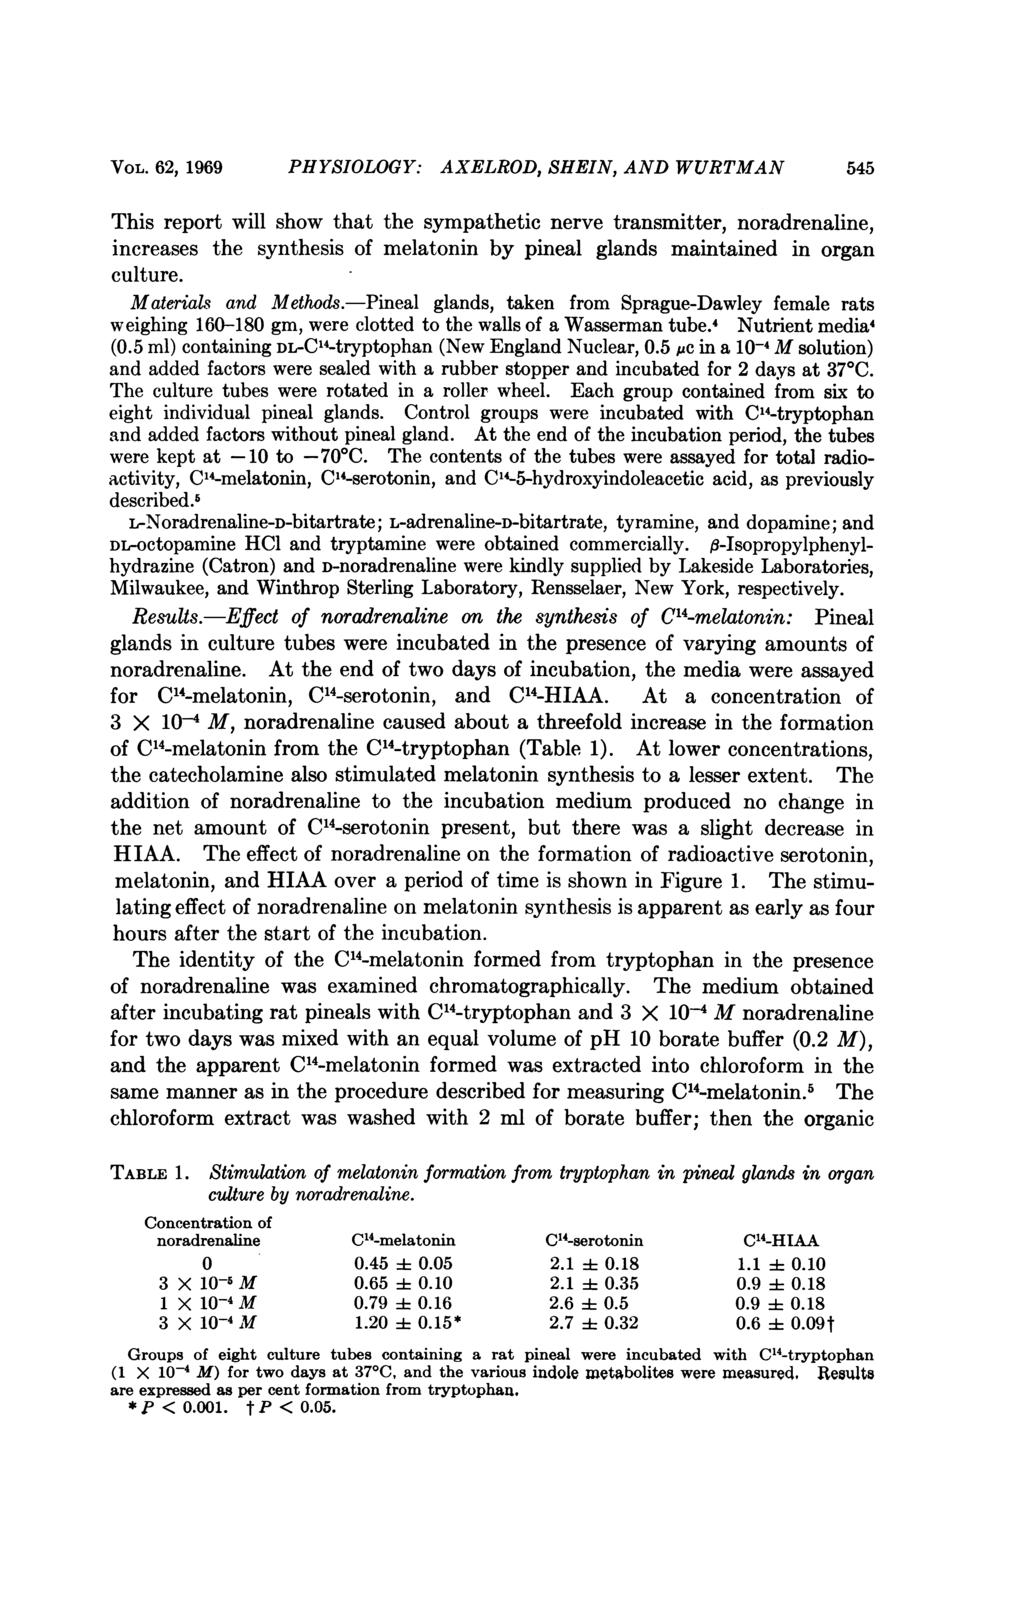 VOL. 62, 1969 PHYSIOLOGY: AXELROD, SHEIN, AND WURTMAN 545 This report will show that the sympathetic nerve transmitter, noradrenaline, increases the synthesis of melatonin by pineal glands maintained